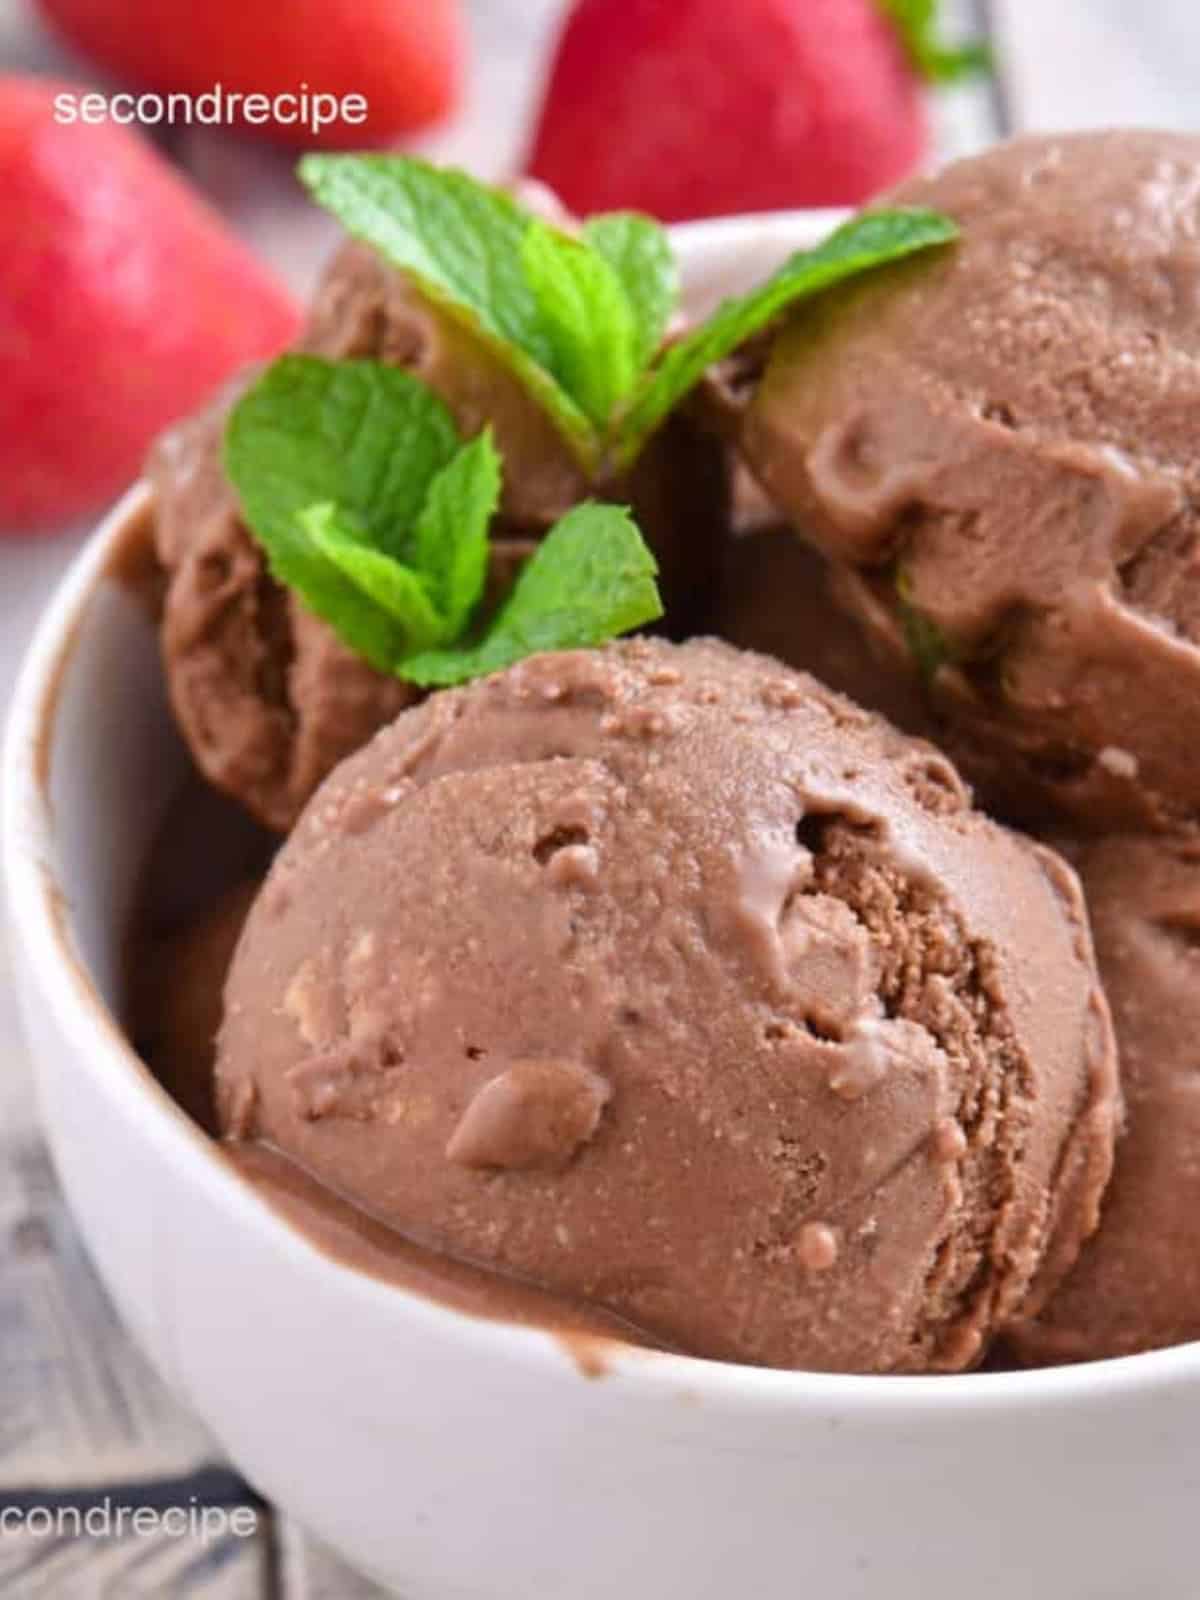 Scoops of chocolate peanut butter ice cream in a bowl topped with fresh herb.